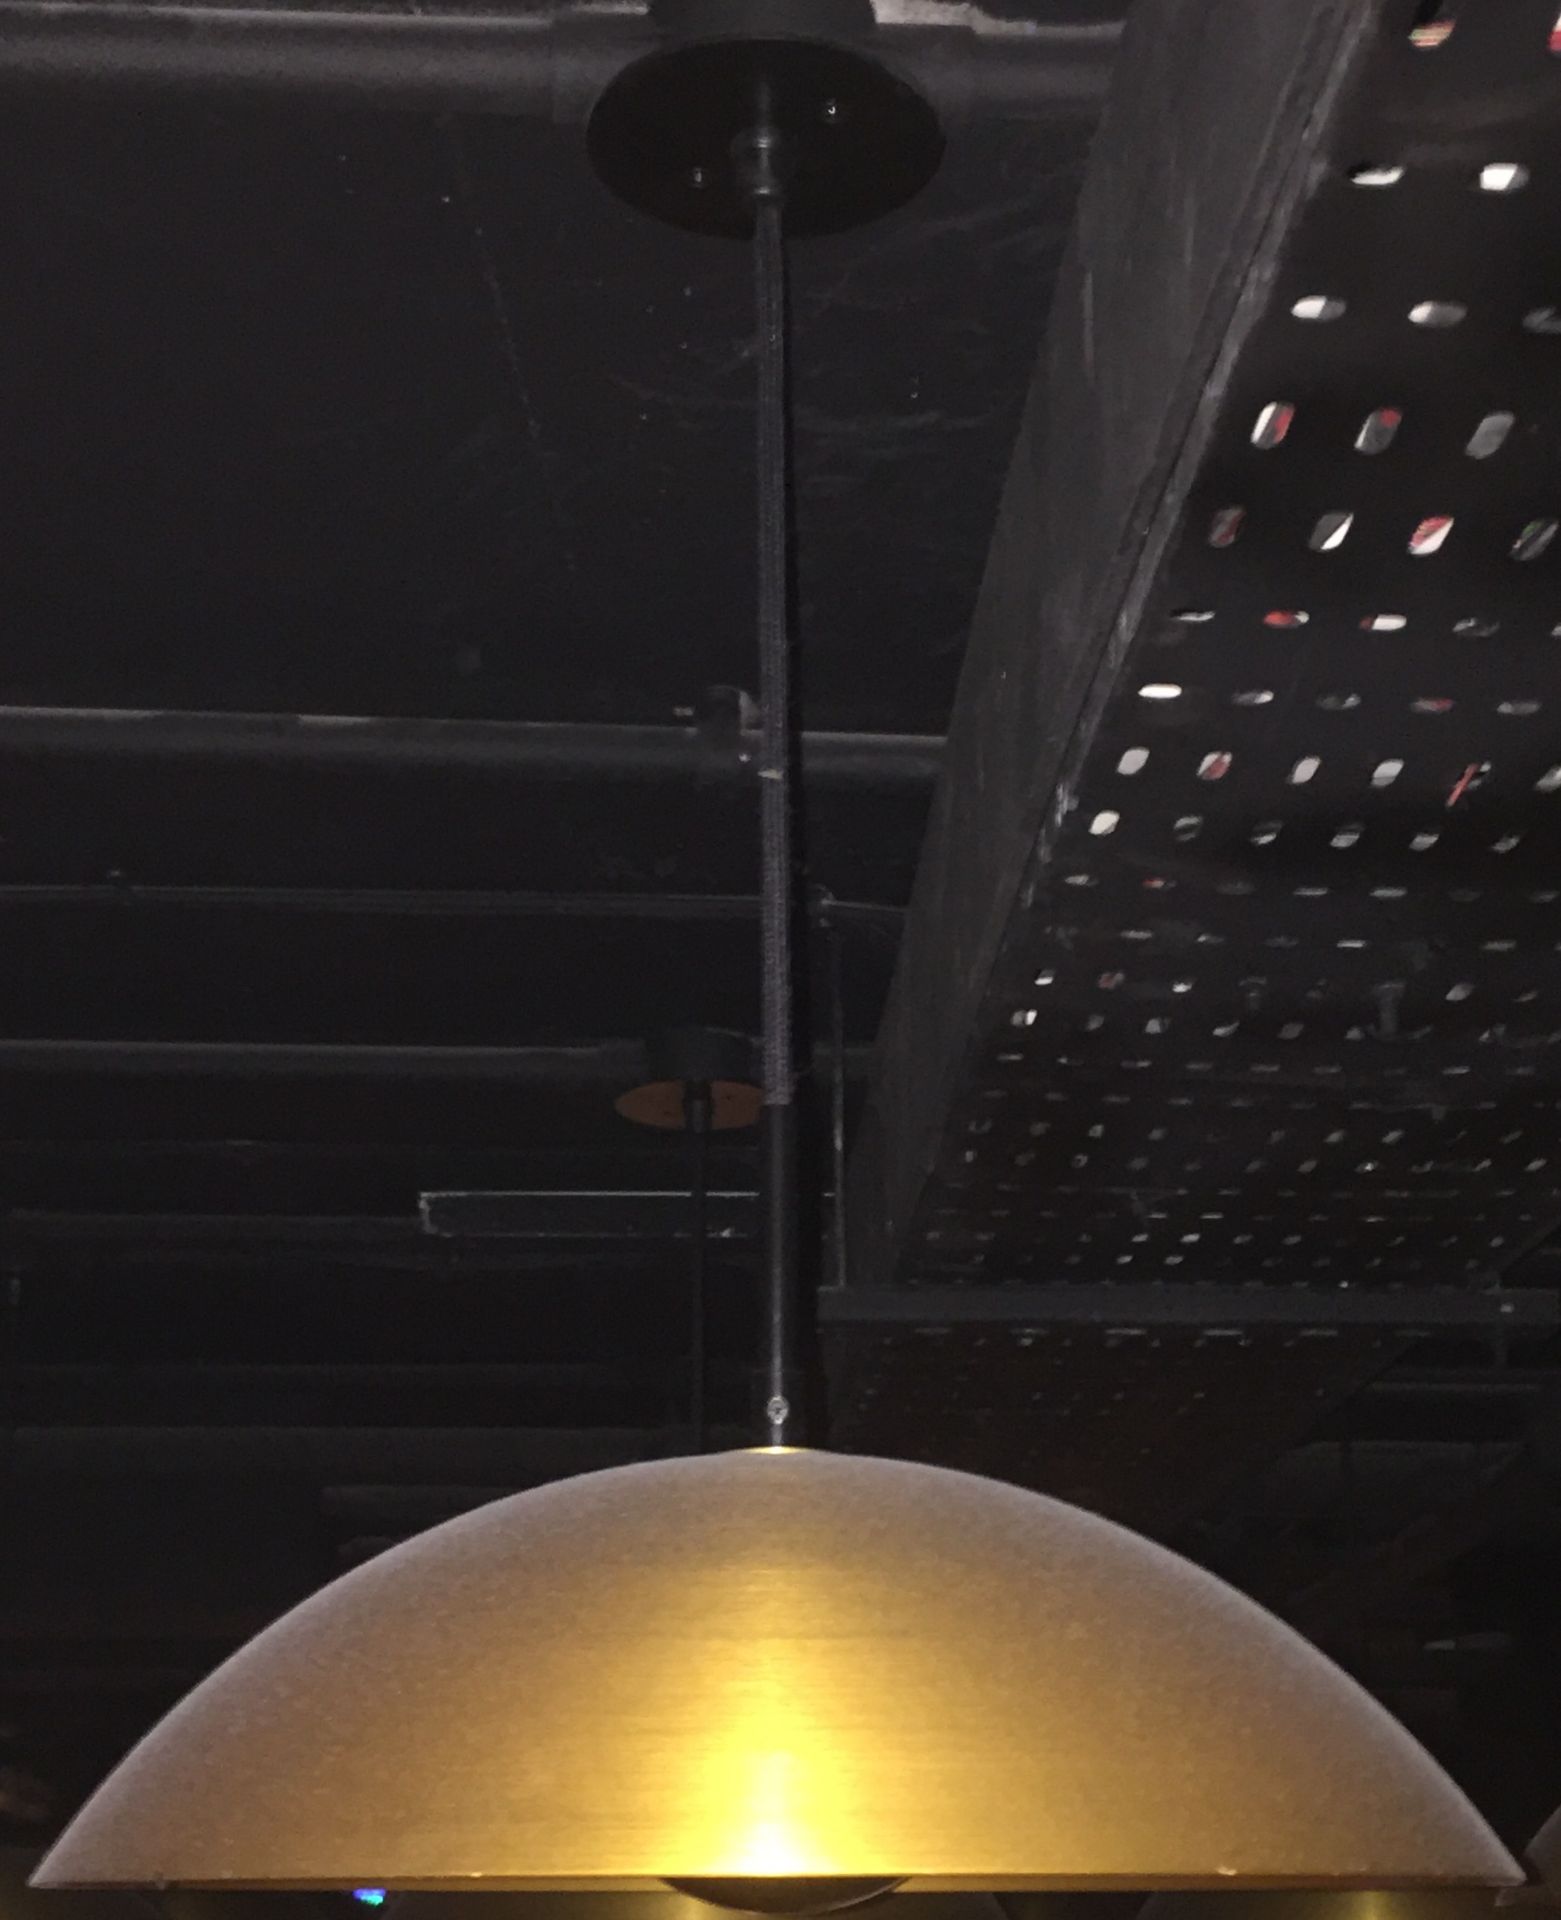 12 x Brass Effect Suspended Ceiling Light Pendant - High Quality Light Fittings With Metal Construct - Image 3 of 7